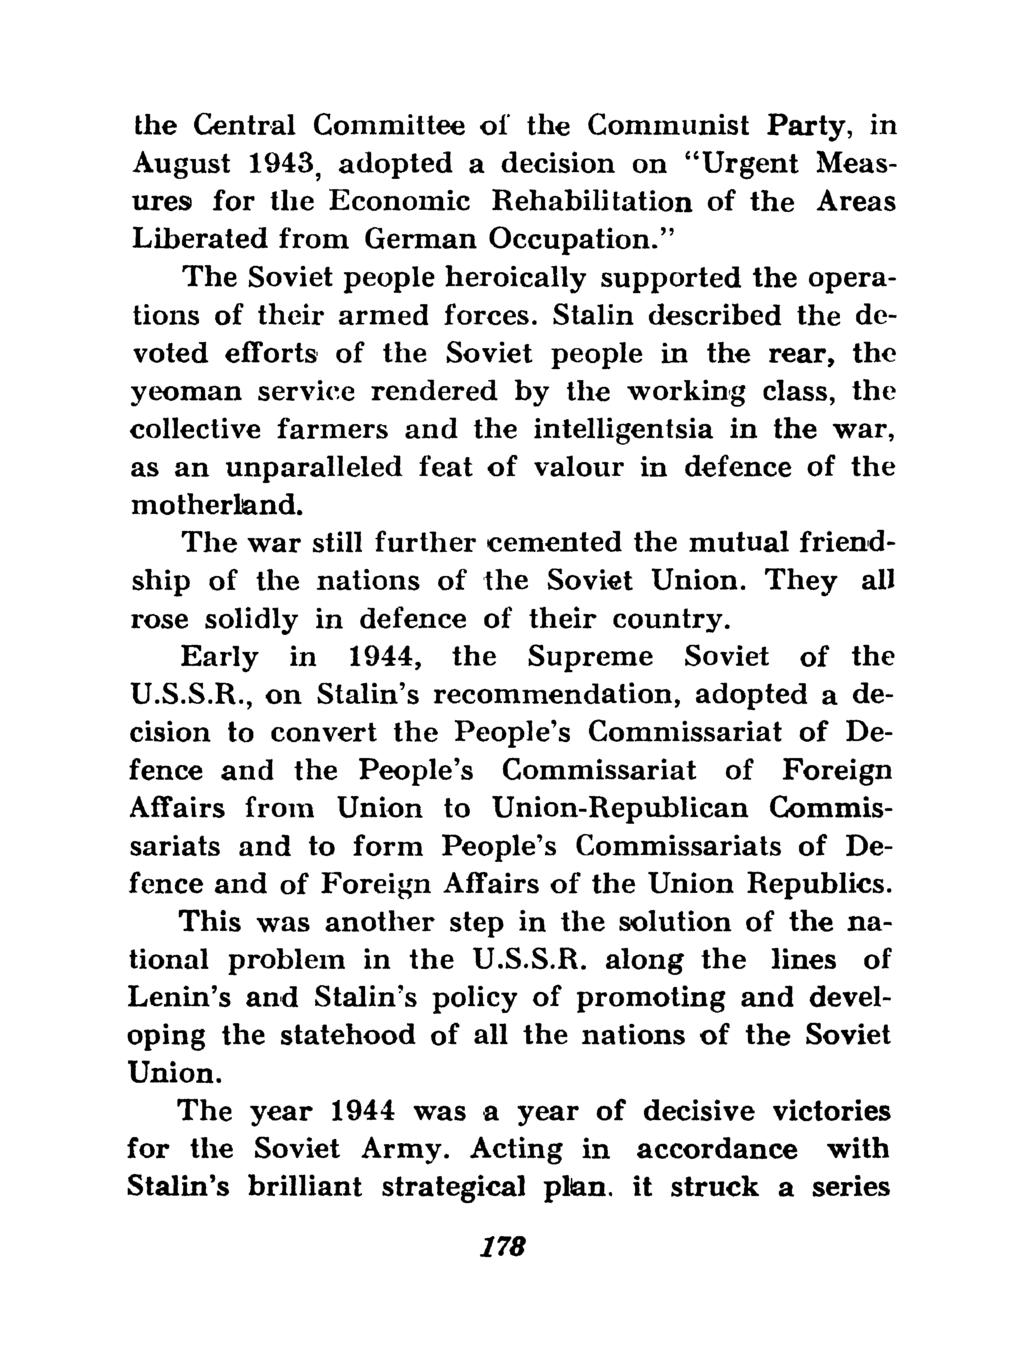 the Central Committee of the Communist Party, in August 1943, adopted a decision on "Urgent Measures for the Economic Rehabilitation of the Areas Liberated from German Occupation.